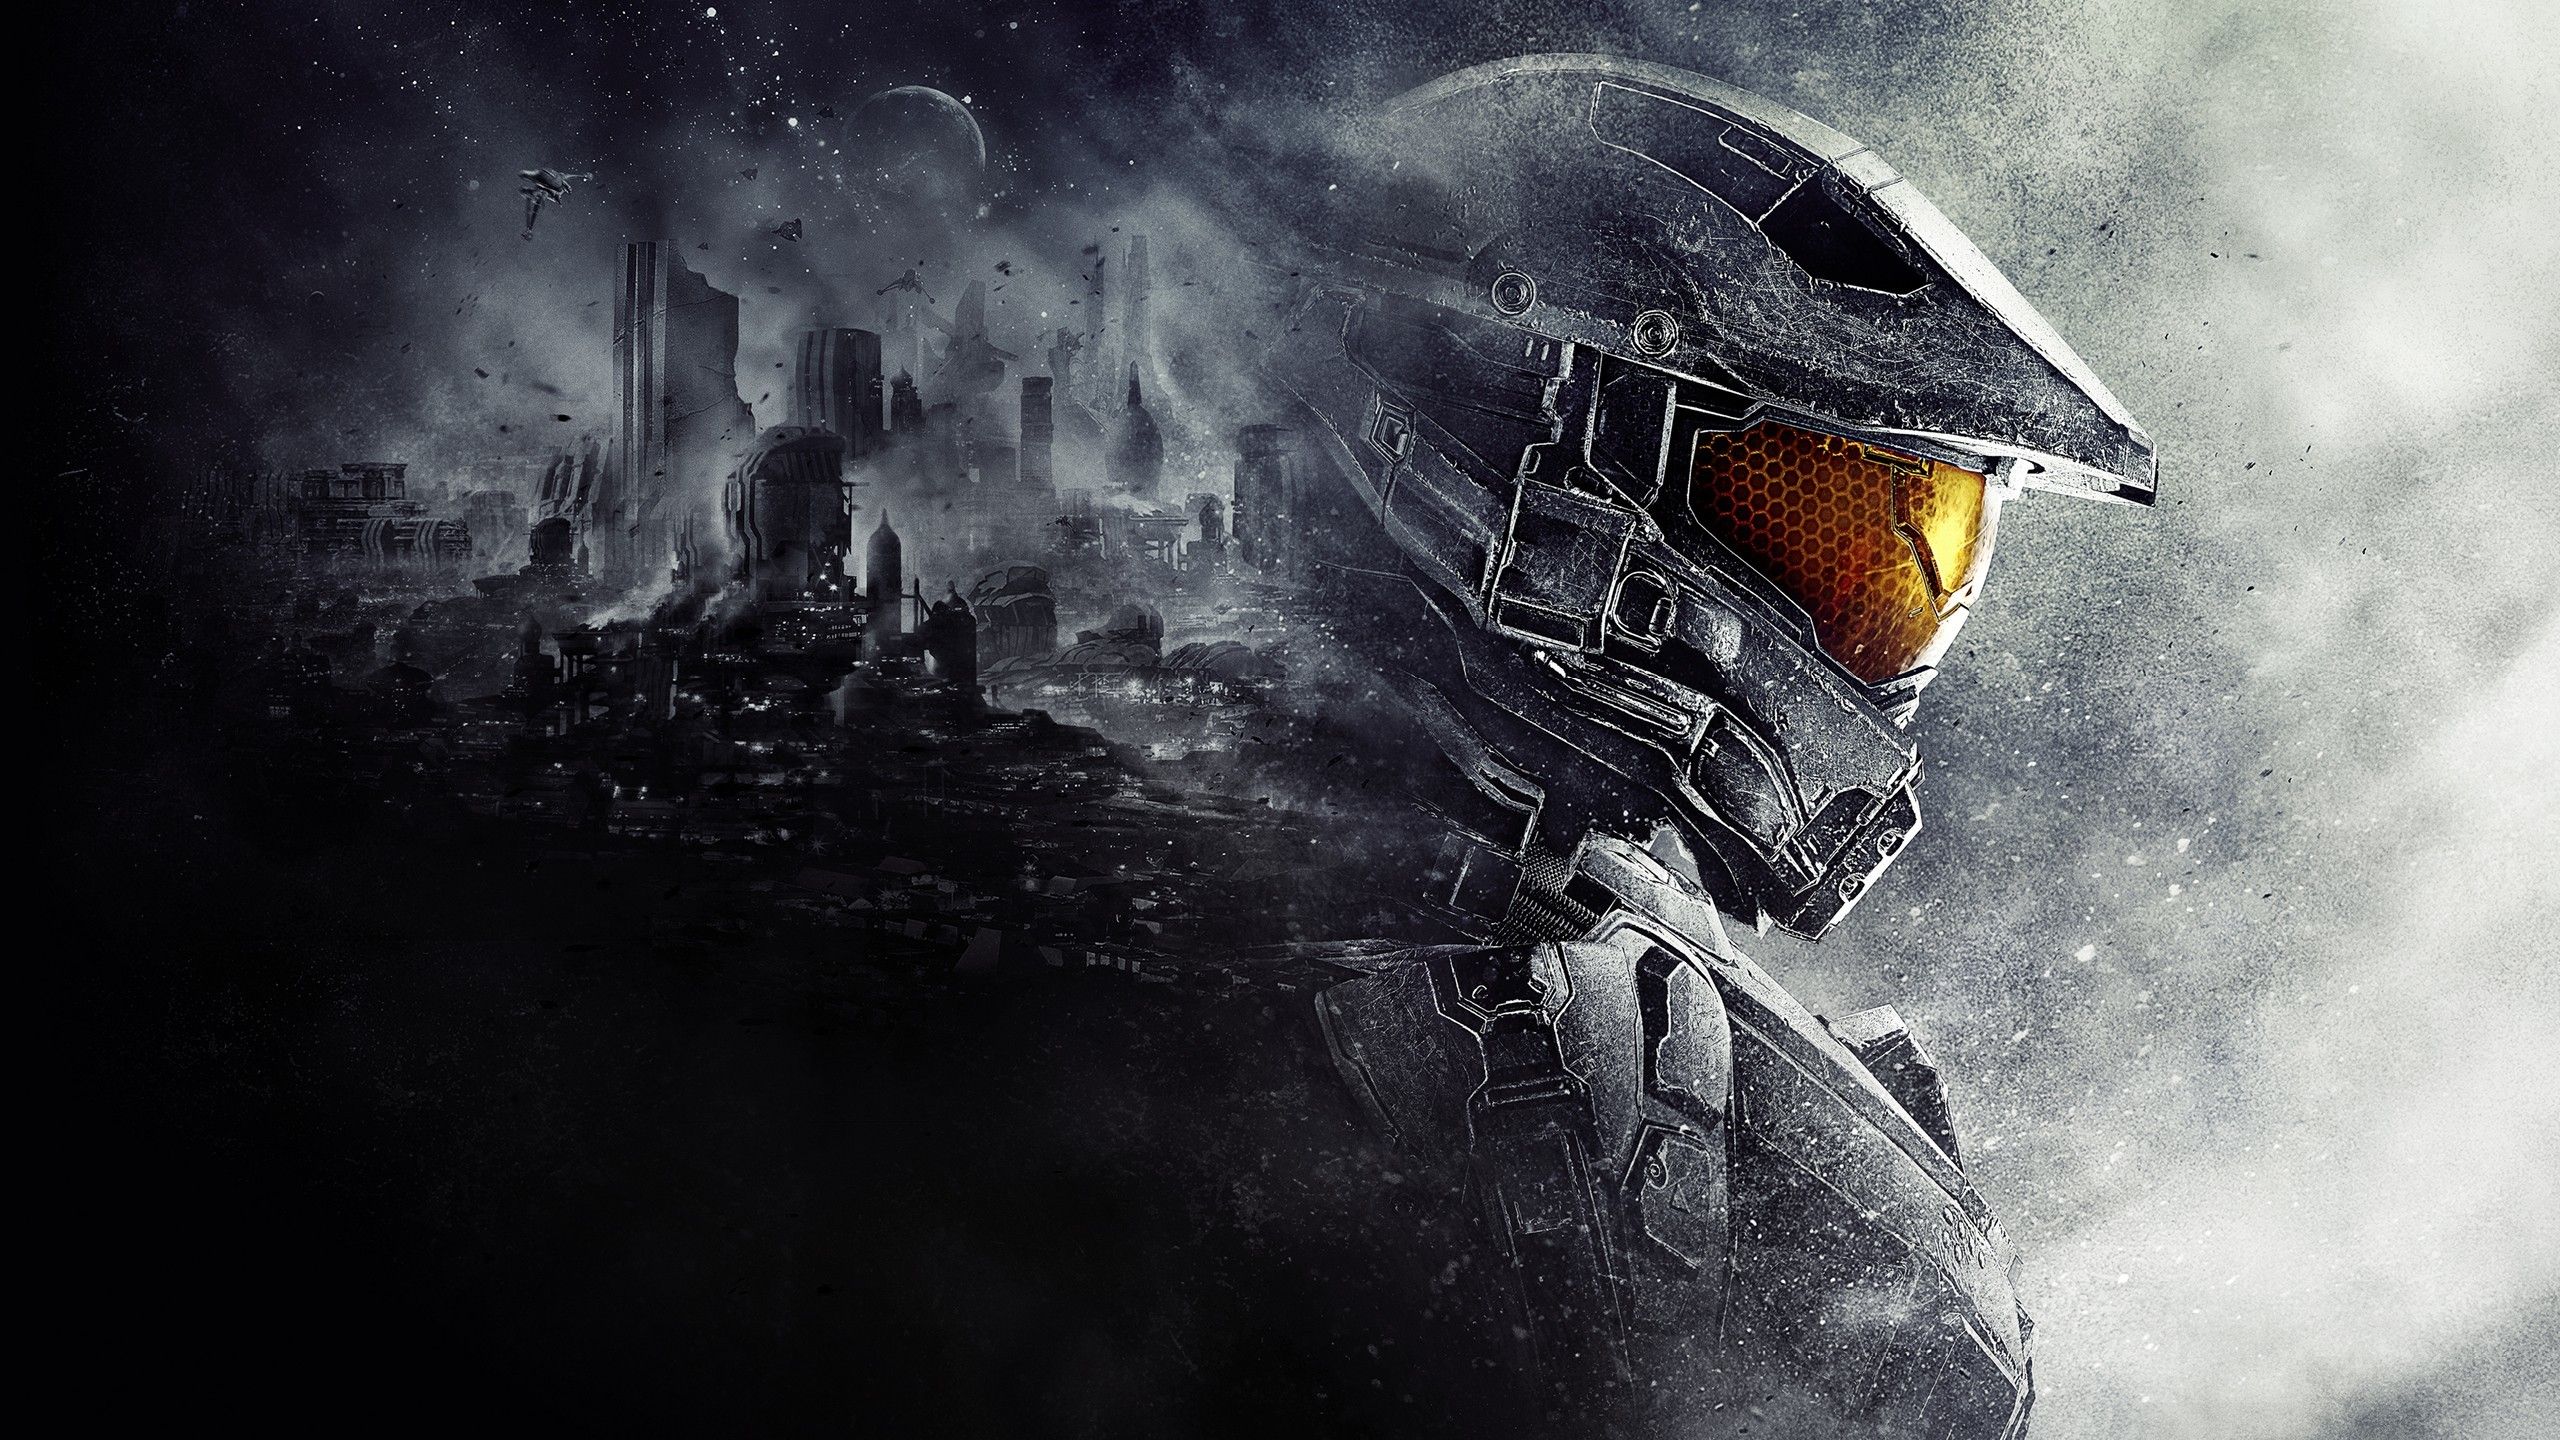 Download Halo wallpapers for mobile phone free Halo HD pictures